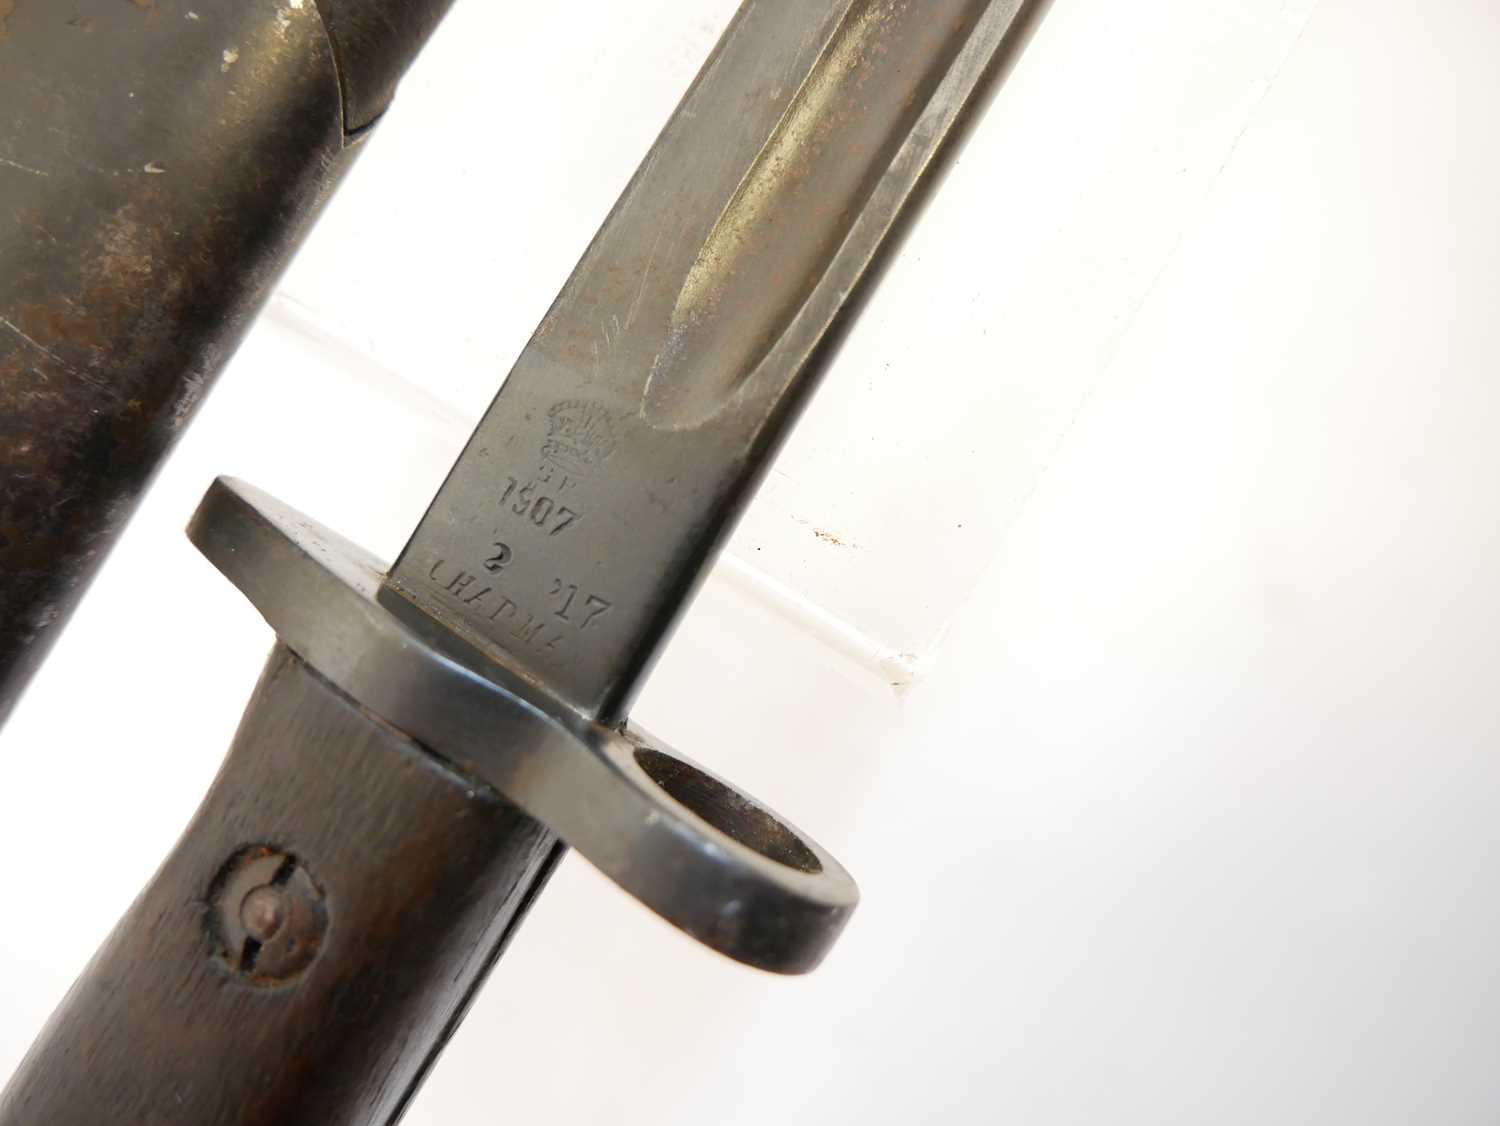 Lee Enfield SMLE 1907 pattern sword bayonet and scabbard, by Chapman, the ricasso stamped with 2' 17 - Image 7 of 9